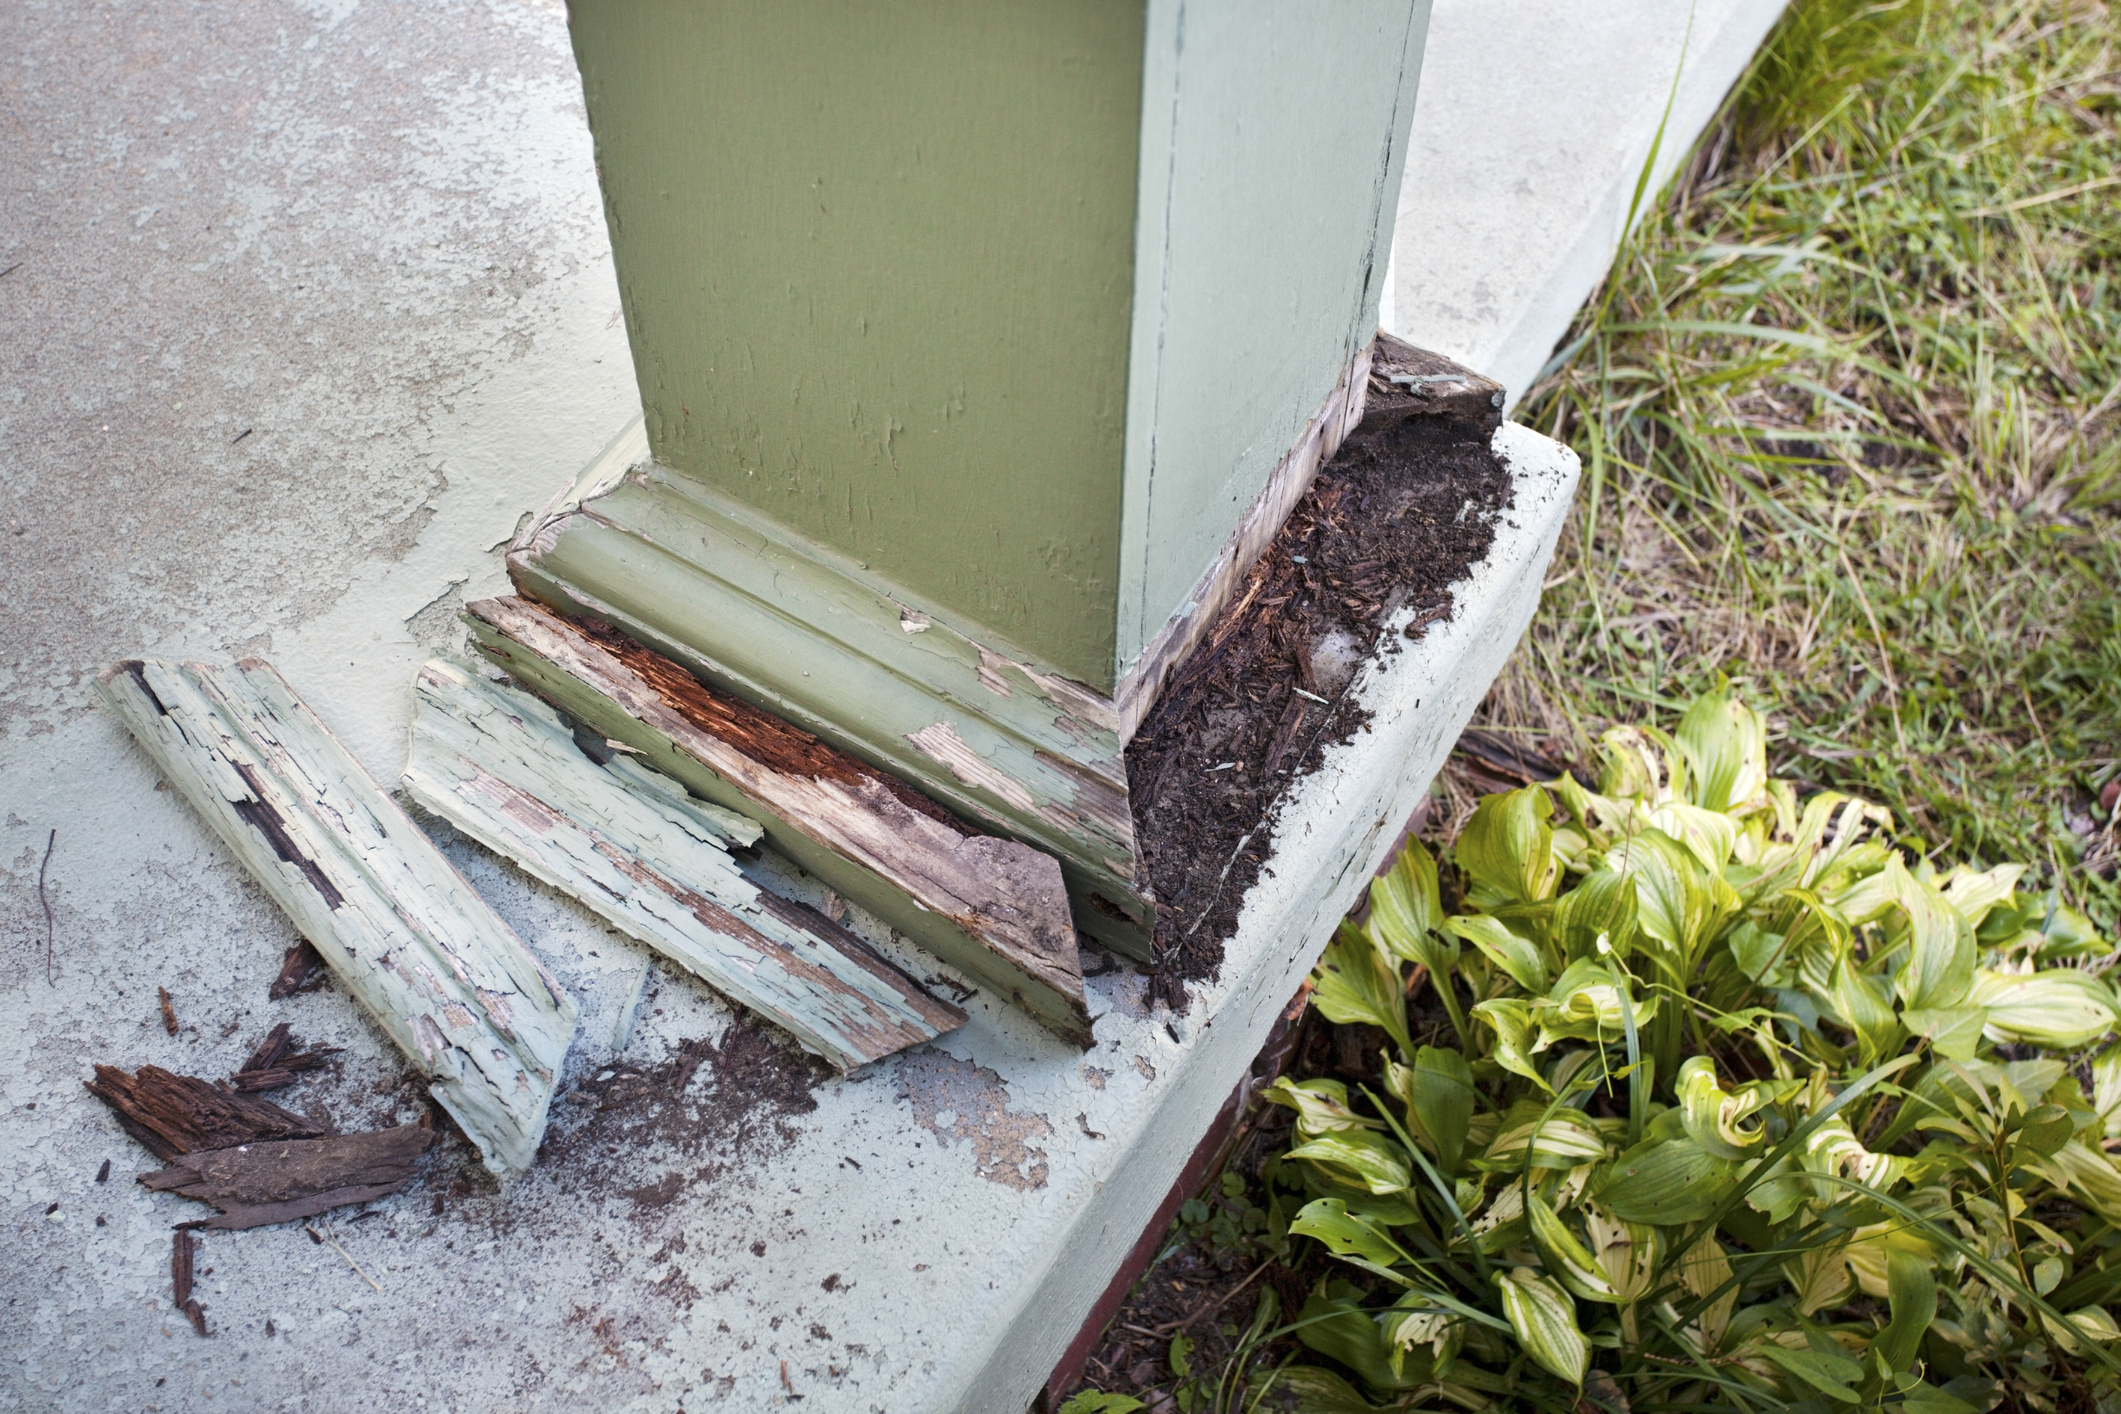 Termites can target support beams and your home’s foundation, putting everyone at risk.